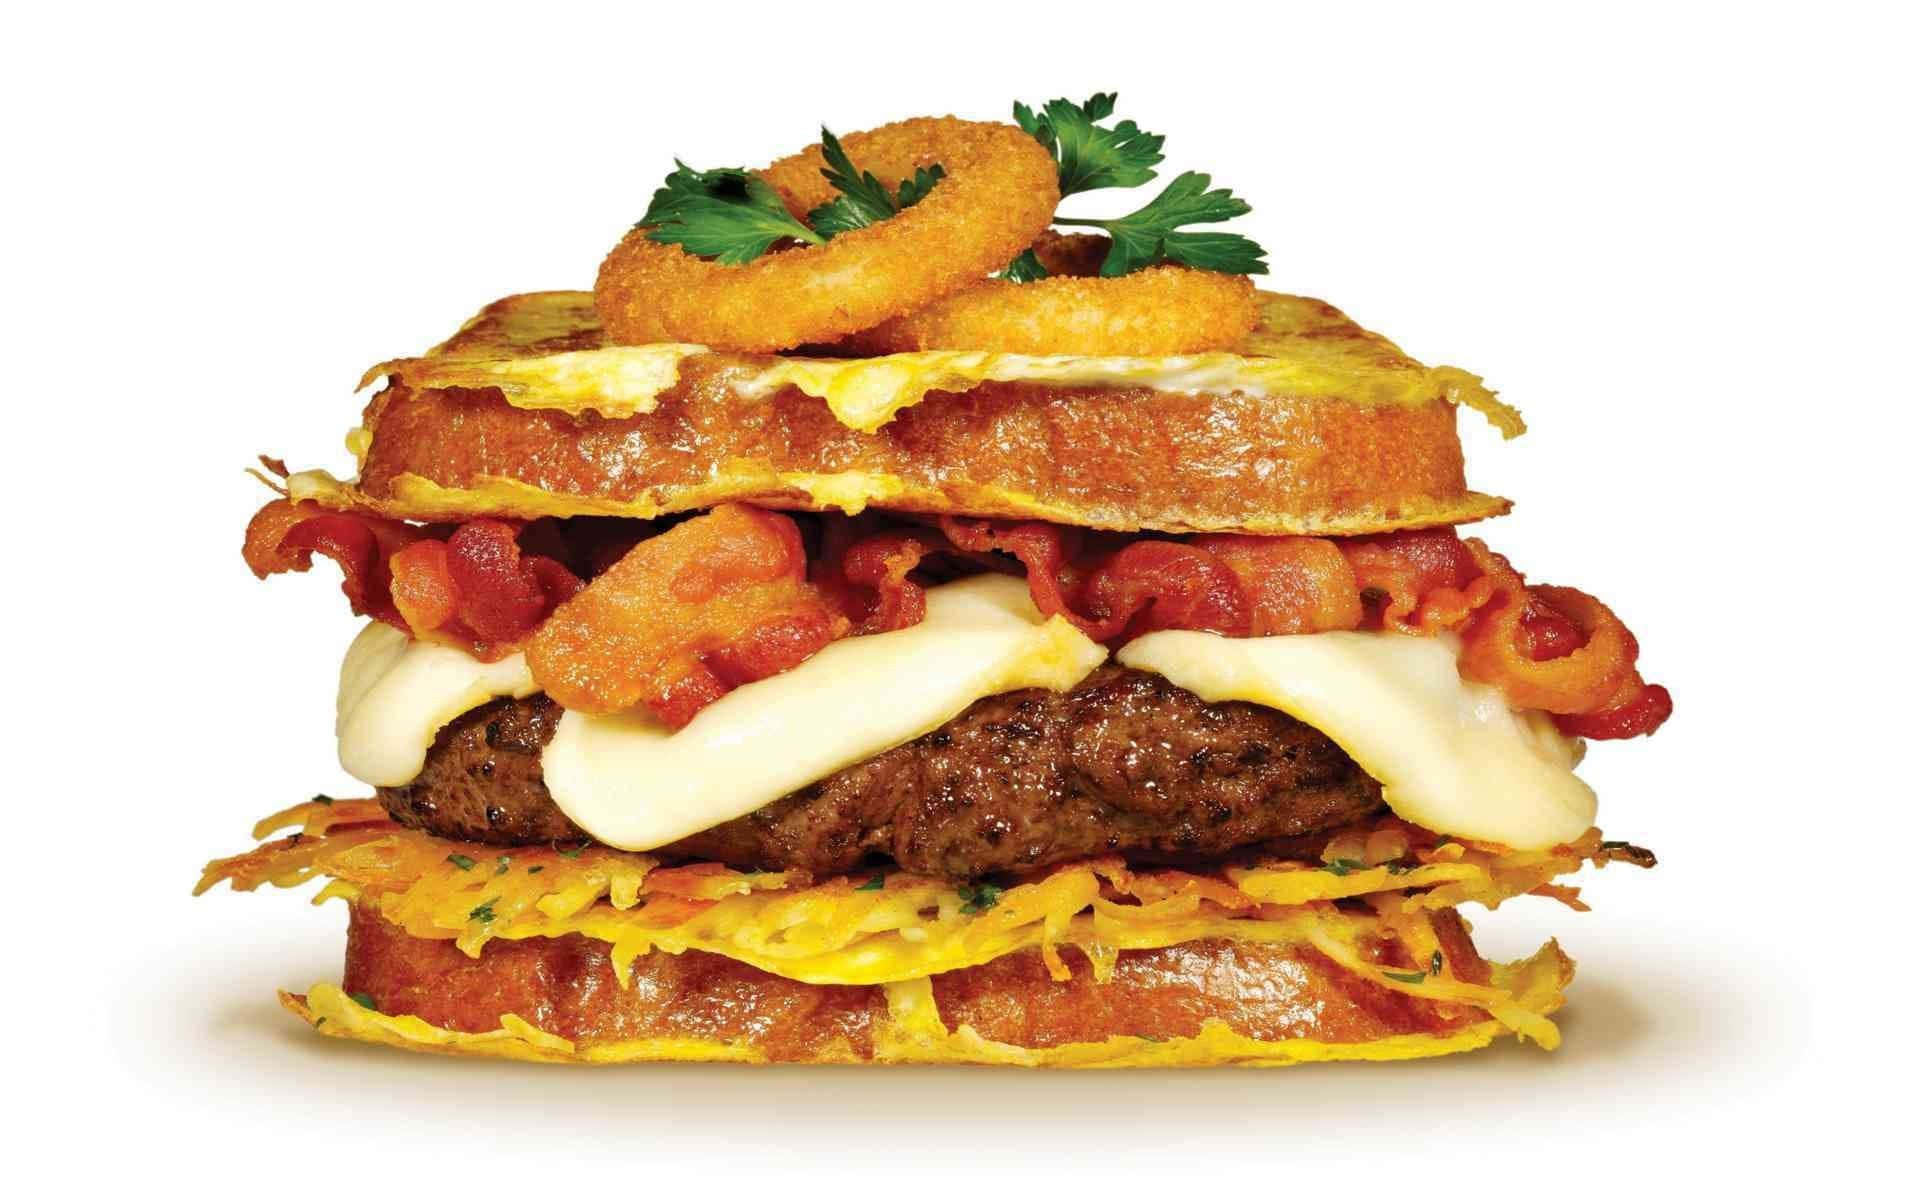 A Burger With Bacon And Cheese On Top